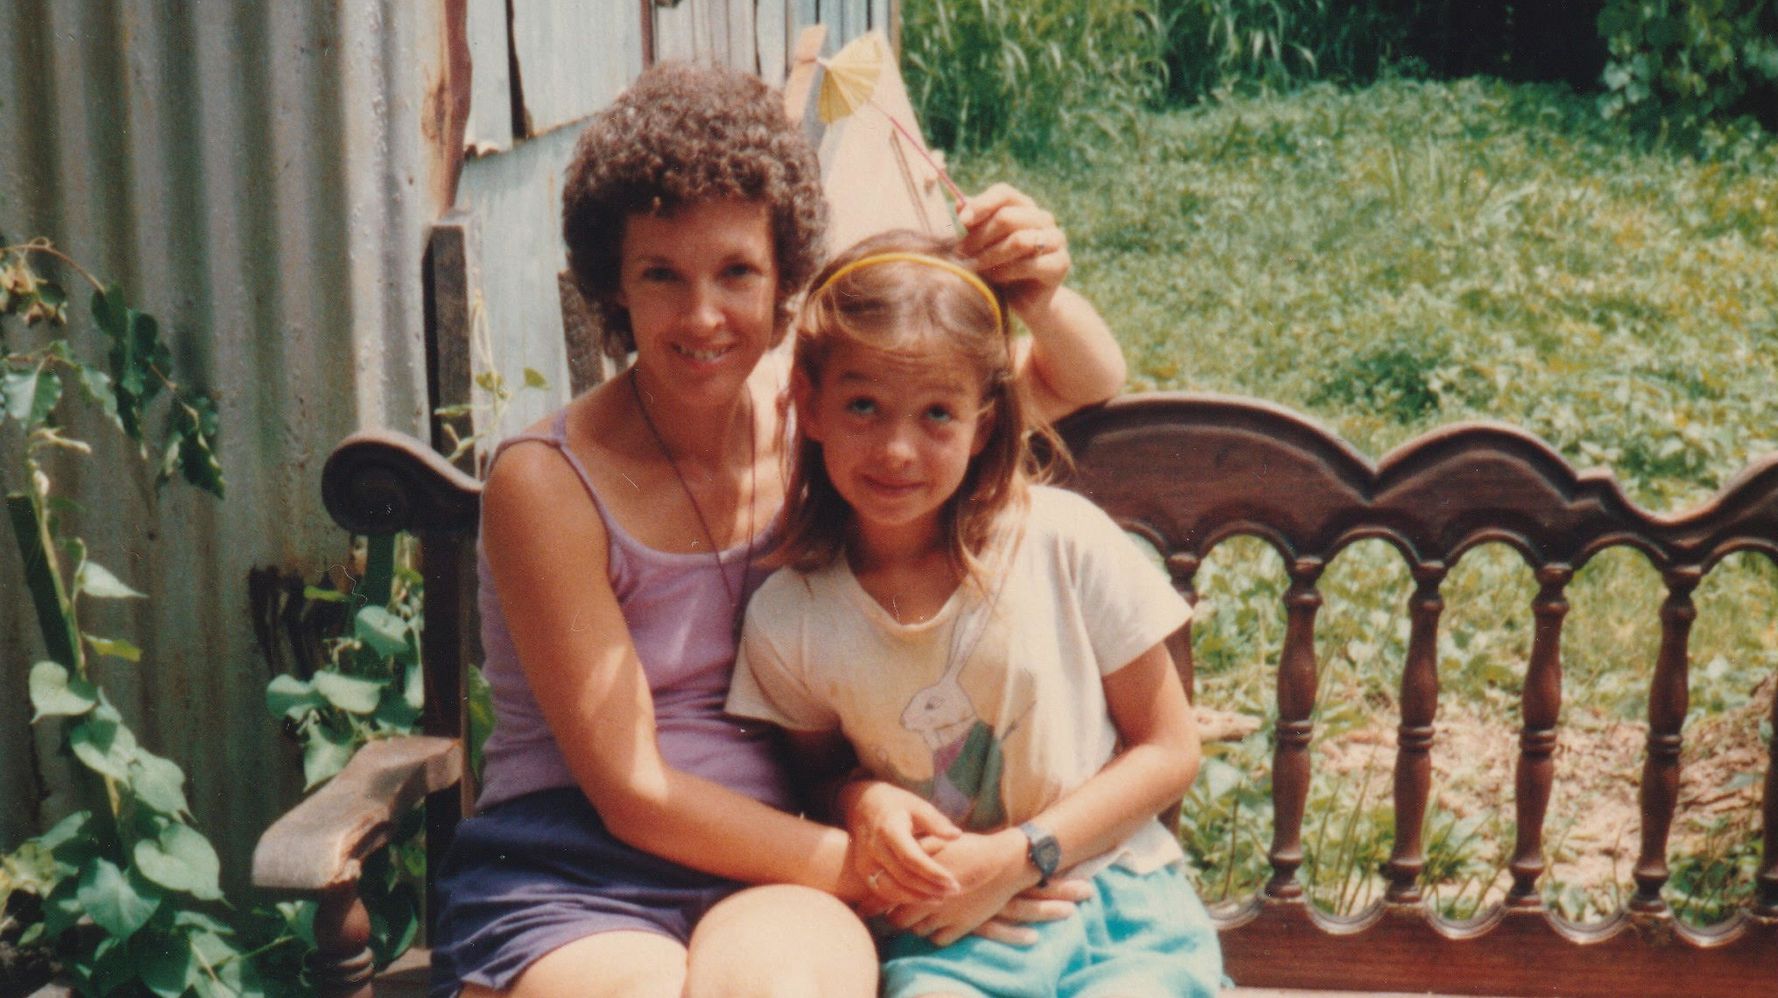 How Growing Up With A Mom In A Secret Lesbian Relationship Shaped My